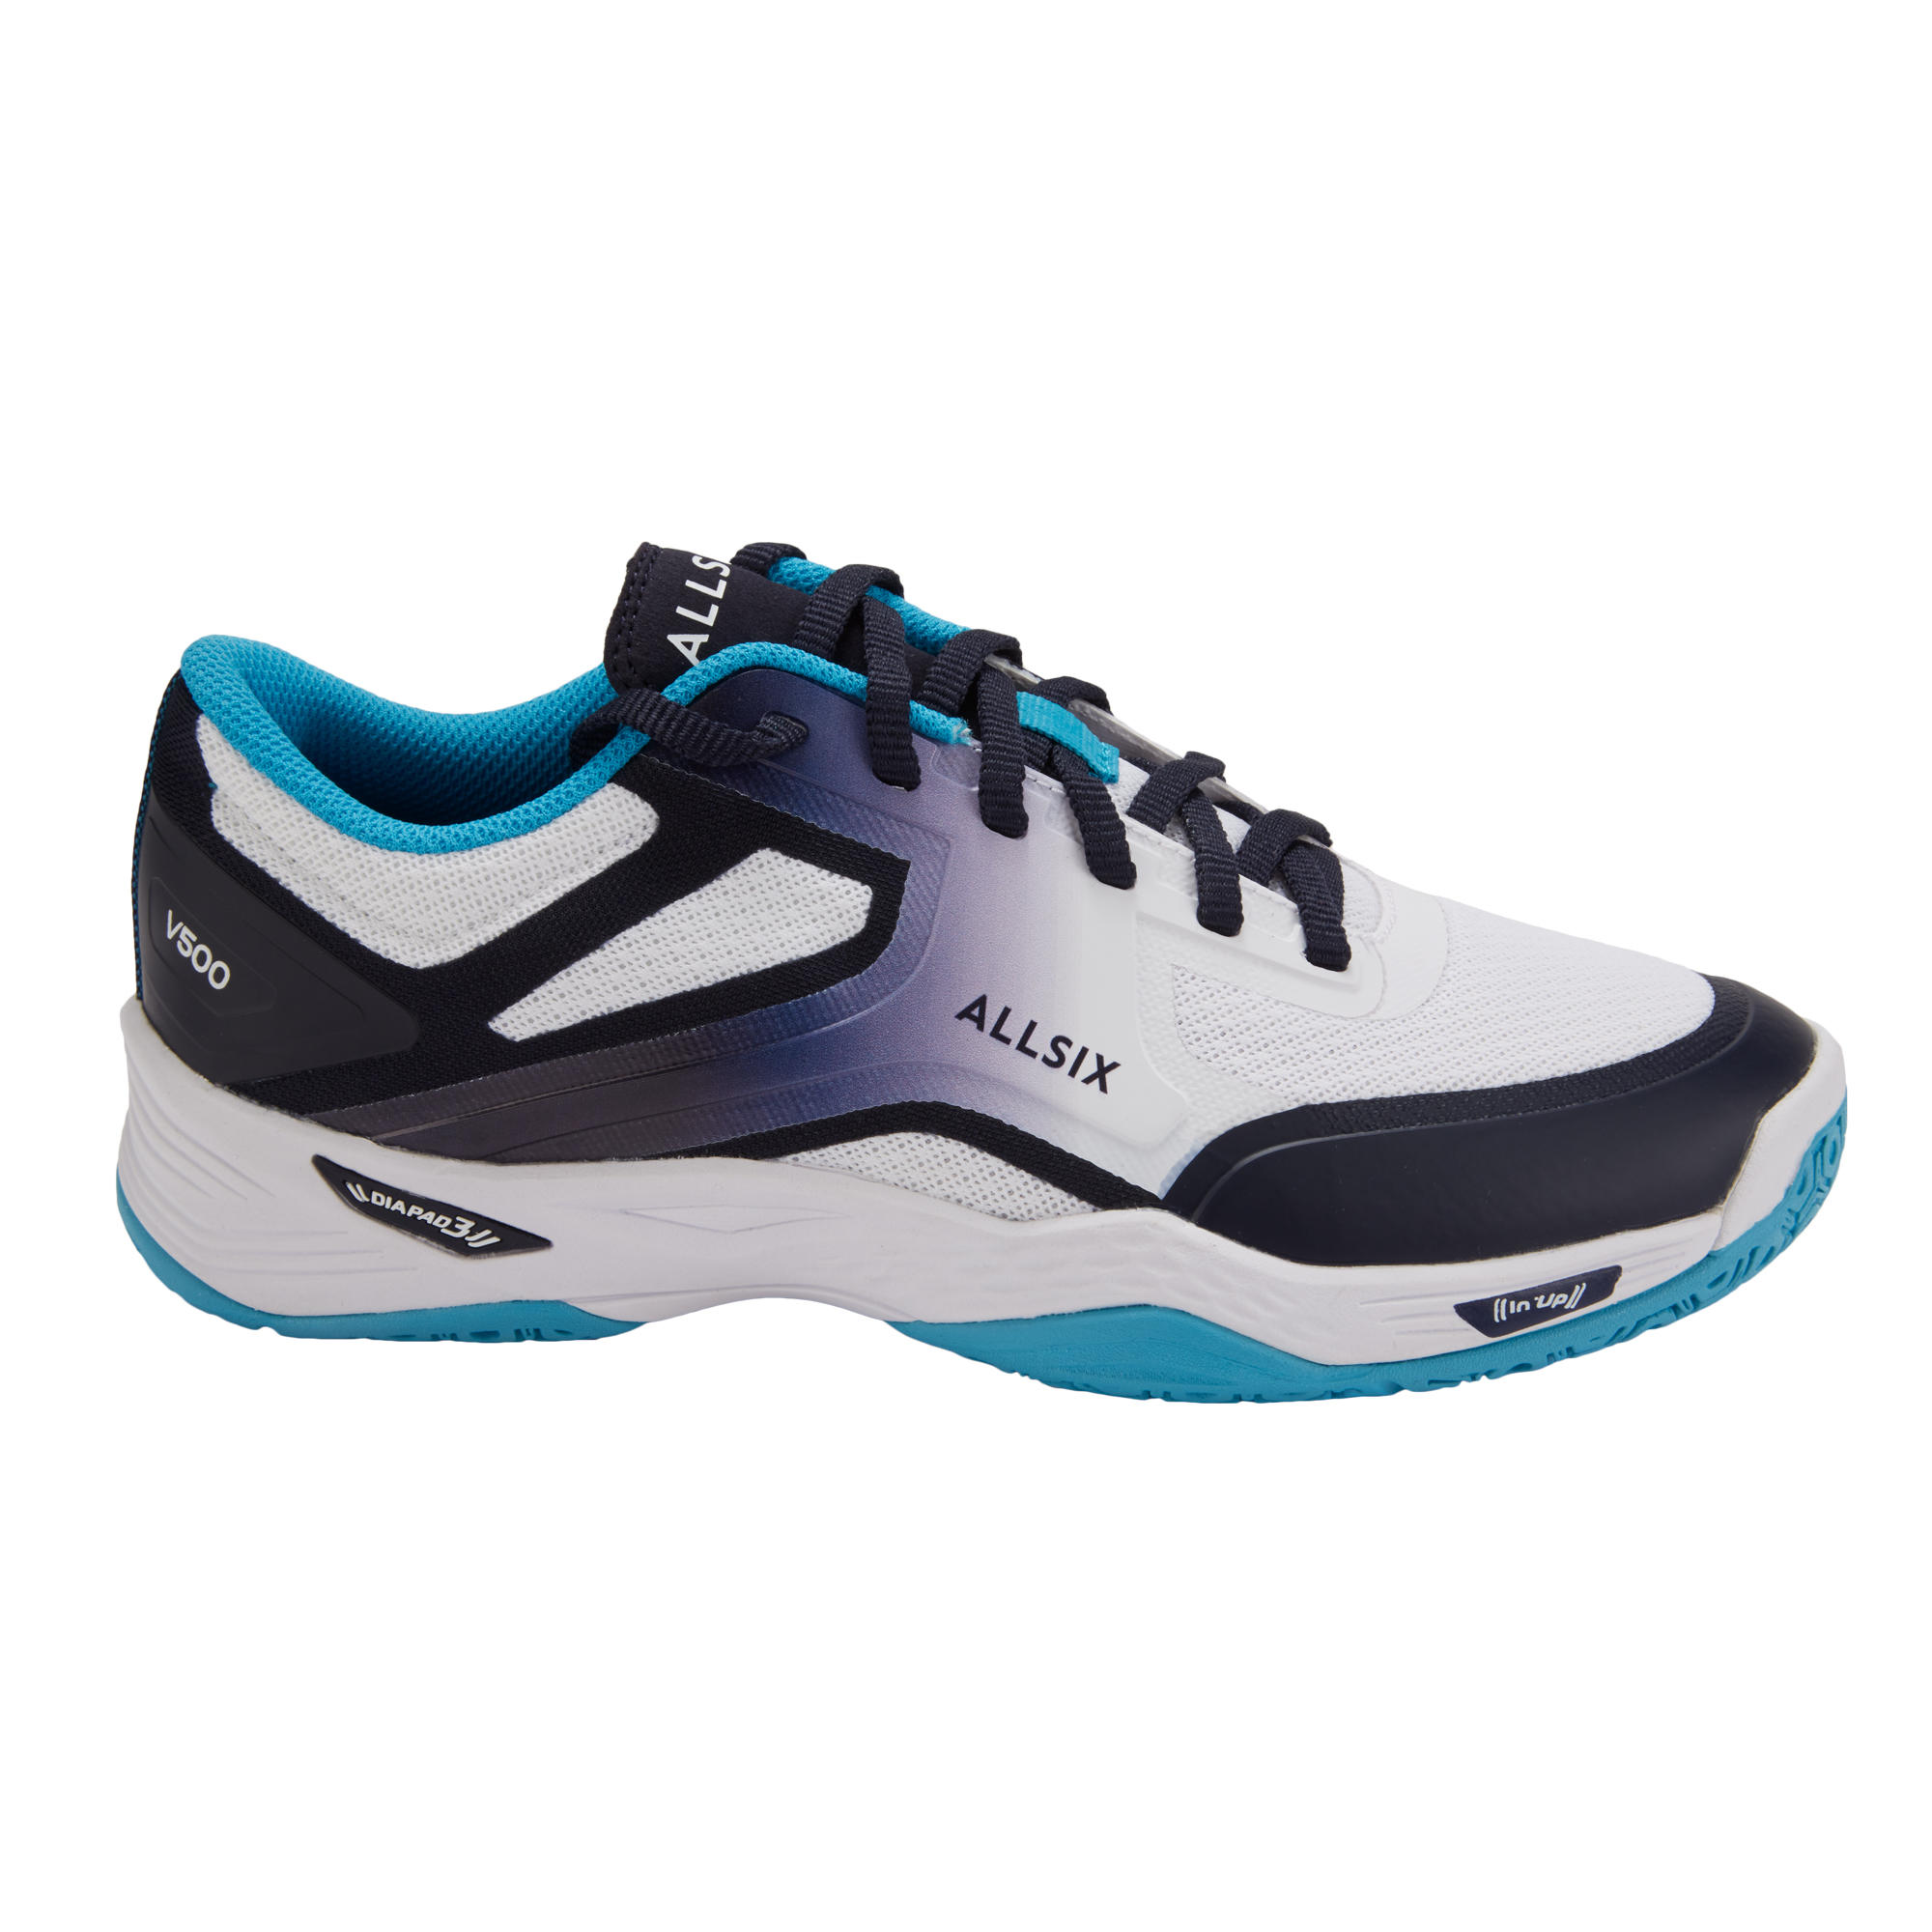 Women's Volleyball Shoes V500 - White/Blue/Turquoise 1/4